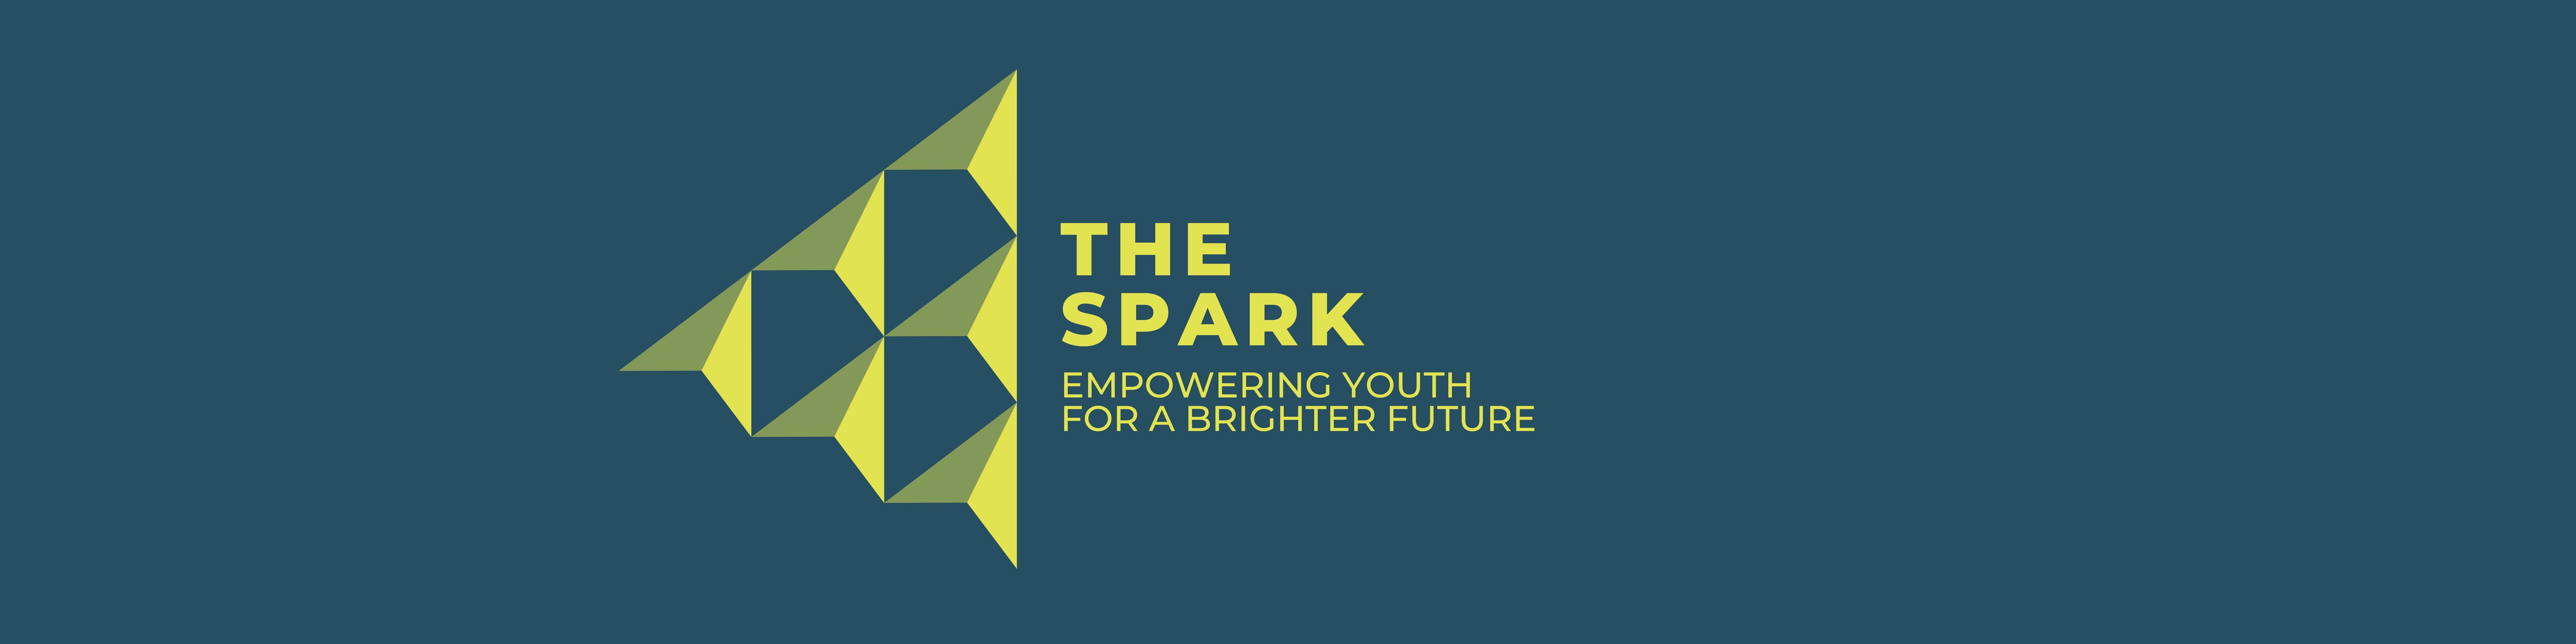 A banner that reads "THE SPARK - Empowering the Youth for a Better Tomorrow"